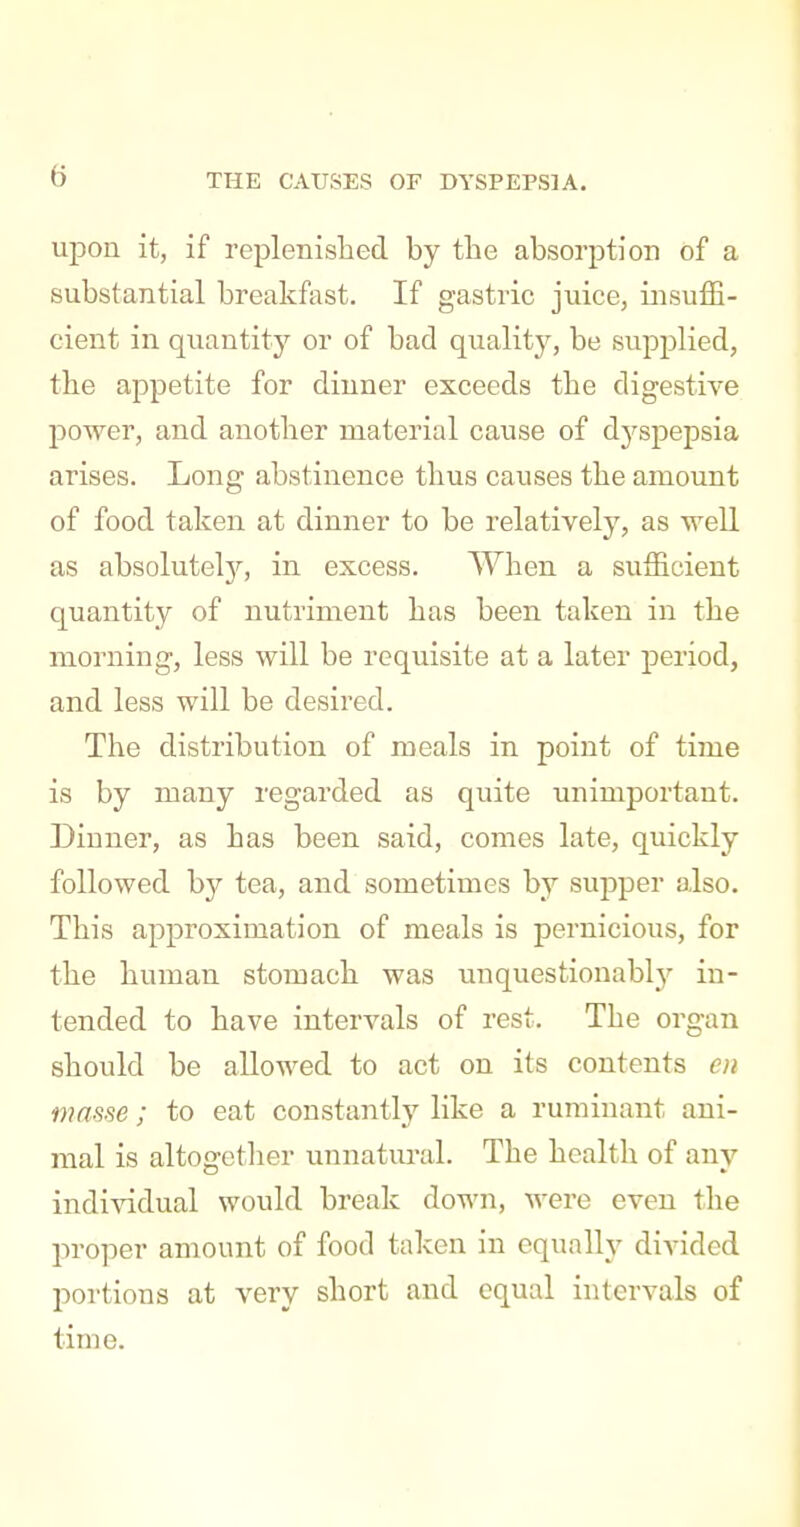 (5 upon it, if replenislied by the absorption of a substantial breakfast. If gastric juice, insuiE- cient in quantity or of bad quality, be supplied, the appetite for dinner exceeds tbe digestive jDower, and another material cause of dyspepsia arises. Long abstinence thus causes the amount of food taken at dinner to be relatively, as well as absolutely'', in excess. When a sufficient quantity of nutriment has been taken in the morning, less will be requisite at a later period, and less will be desired. The distribution of meals in point of time is by many regarded as quite unimportant. Dinner, as has been said, comes late, quickly followed by tea, and sometimes by supper also. This approximation of meals is pernicious, for the human stomach was unquestionably in- tended to have intervals of rest. The organ should be allowed to act on its contents en masse ; to eat constantly like a ruminant ani- mal is altogether unnatural. The health of any individual would break down, were even the proper amount of food taken in equally divided portions at very short and equal intervals of time.